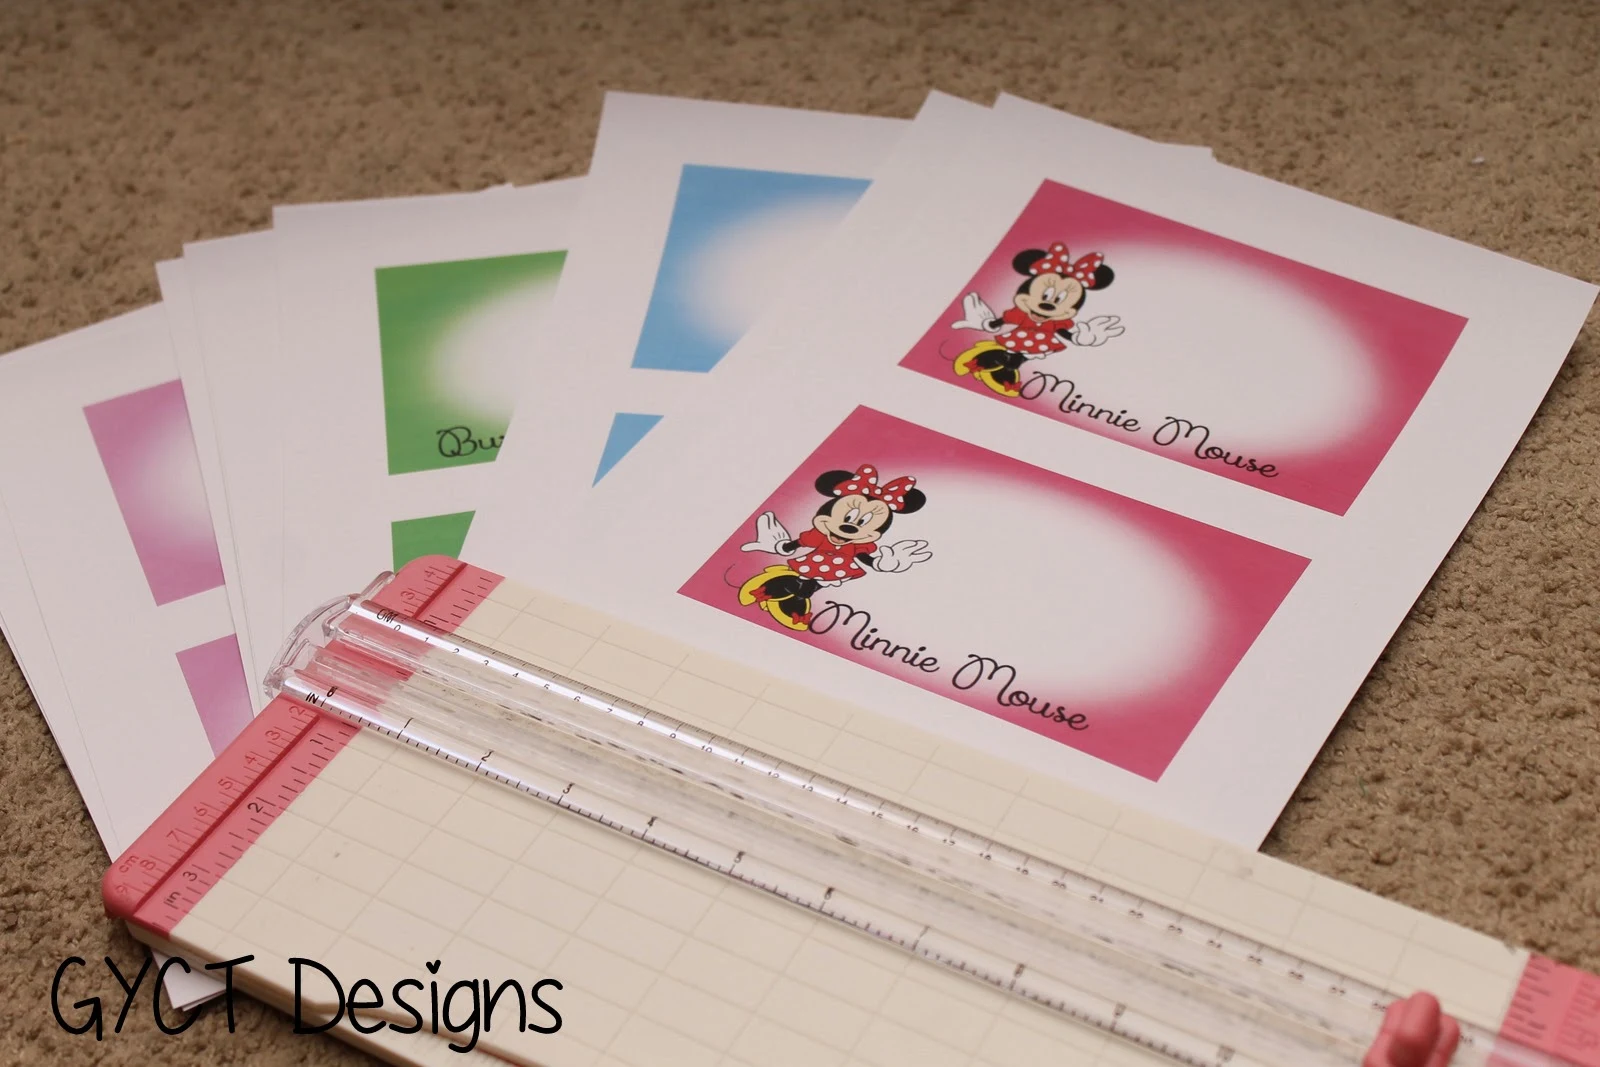 DIY Character Autograph Books and Printables by GYCT